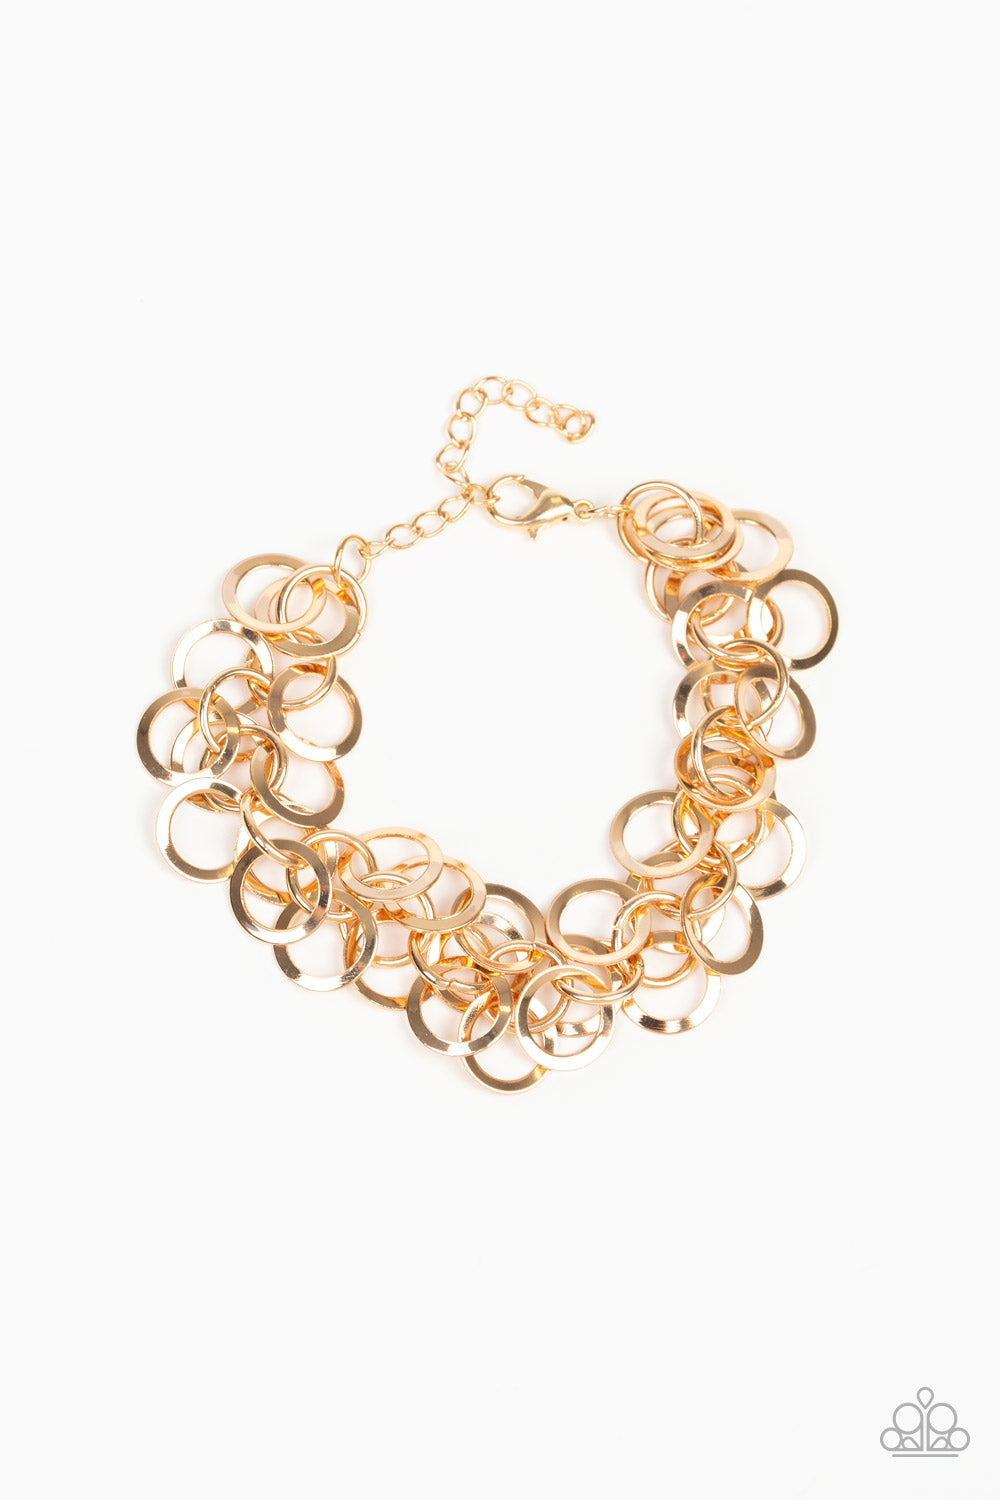 Ringing In The Bling Gold Paparazzi Necklace Cashmere Pink Jewels - Cashmere Pink Jewels & Accessories, Cashmere Pink Jewels & Accessories - Paparazzi